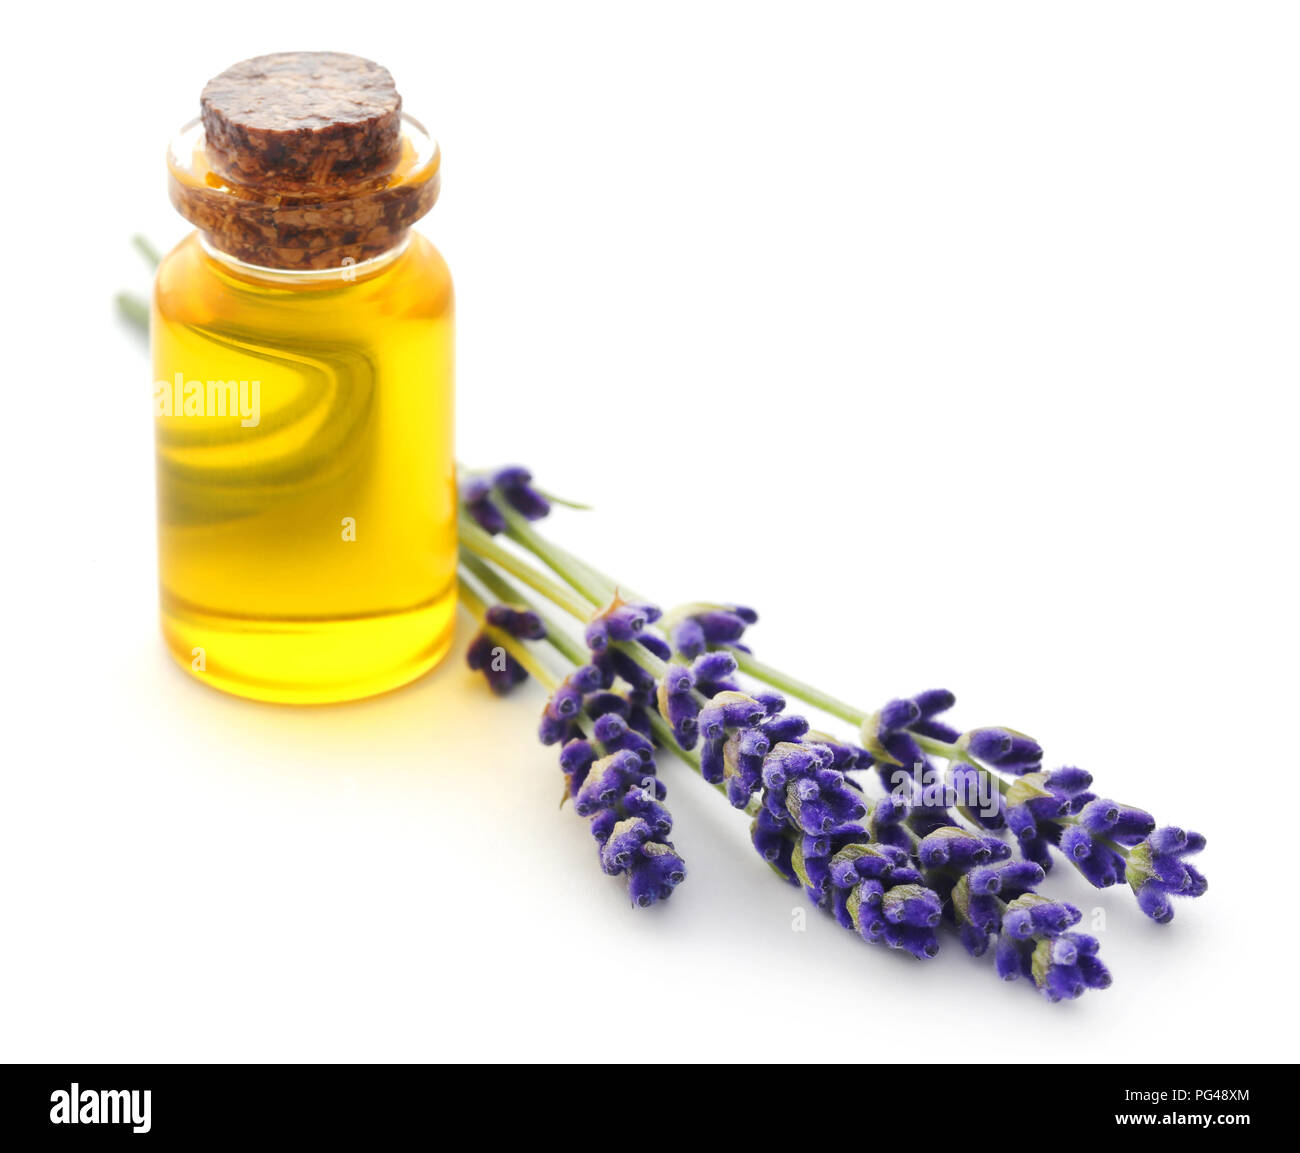 Lavender oil with flower over white background Stock Photo